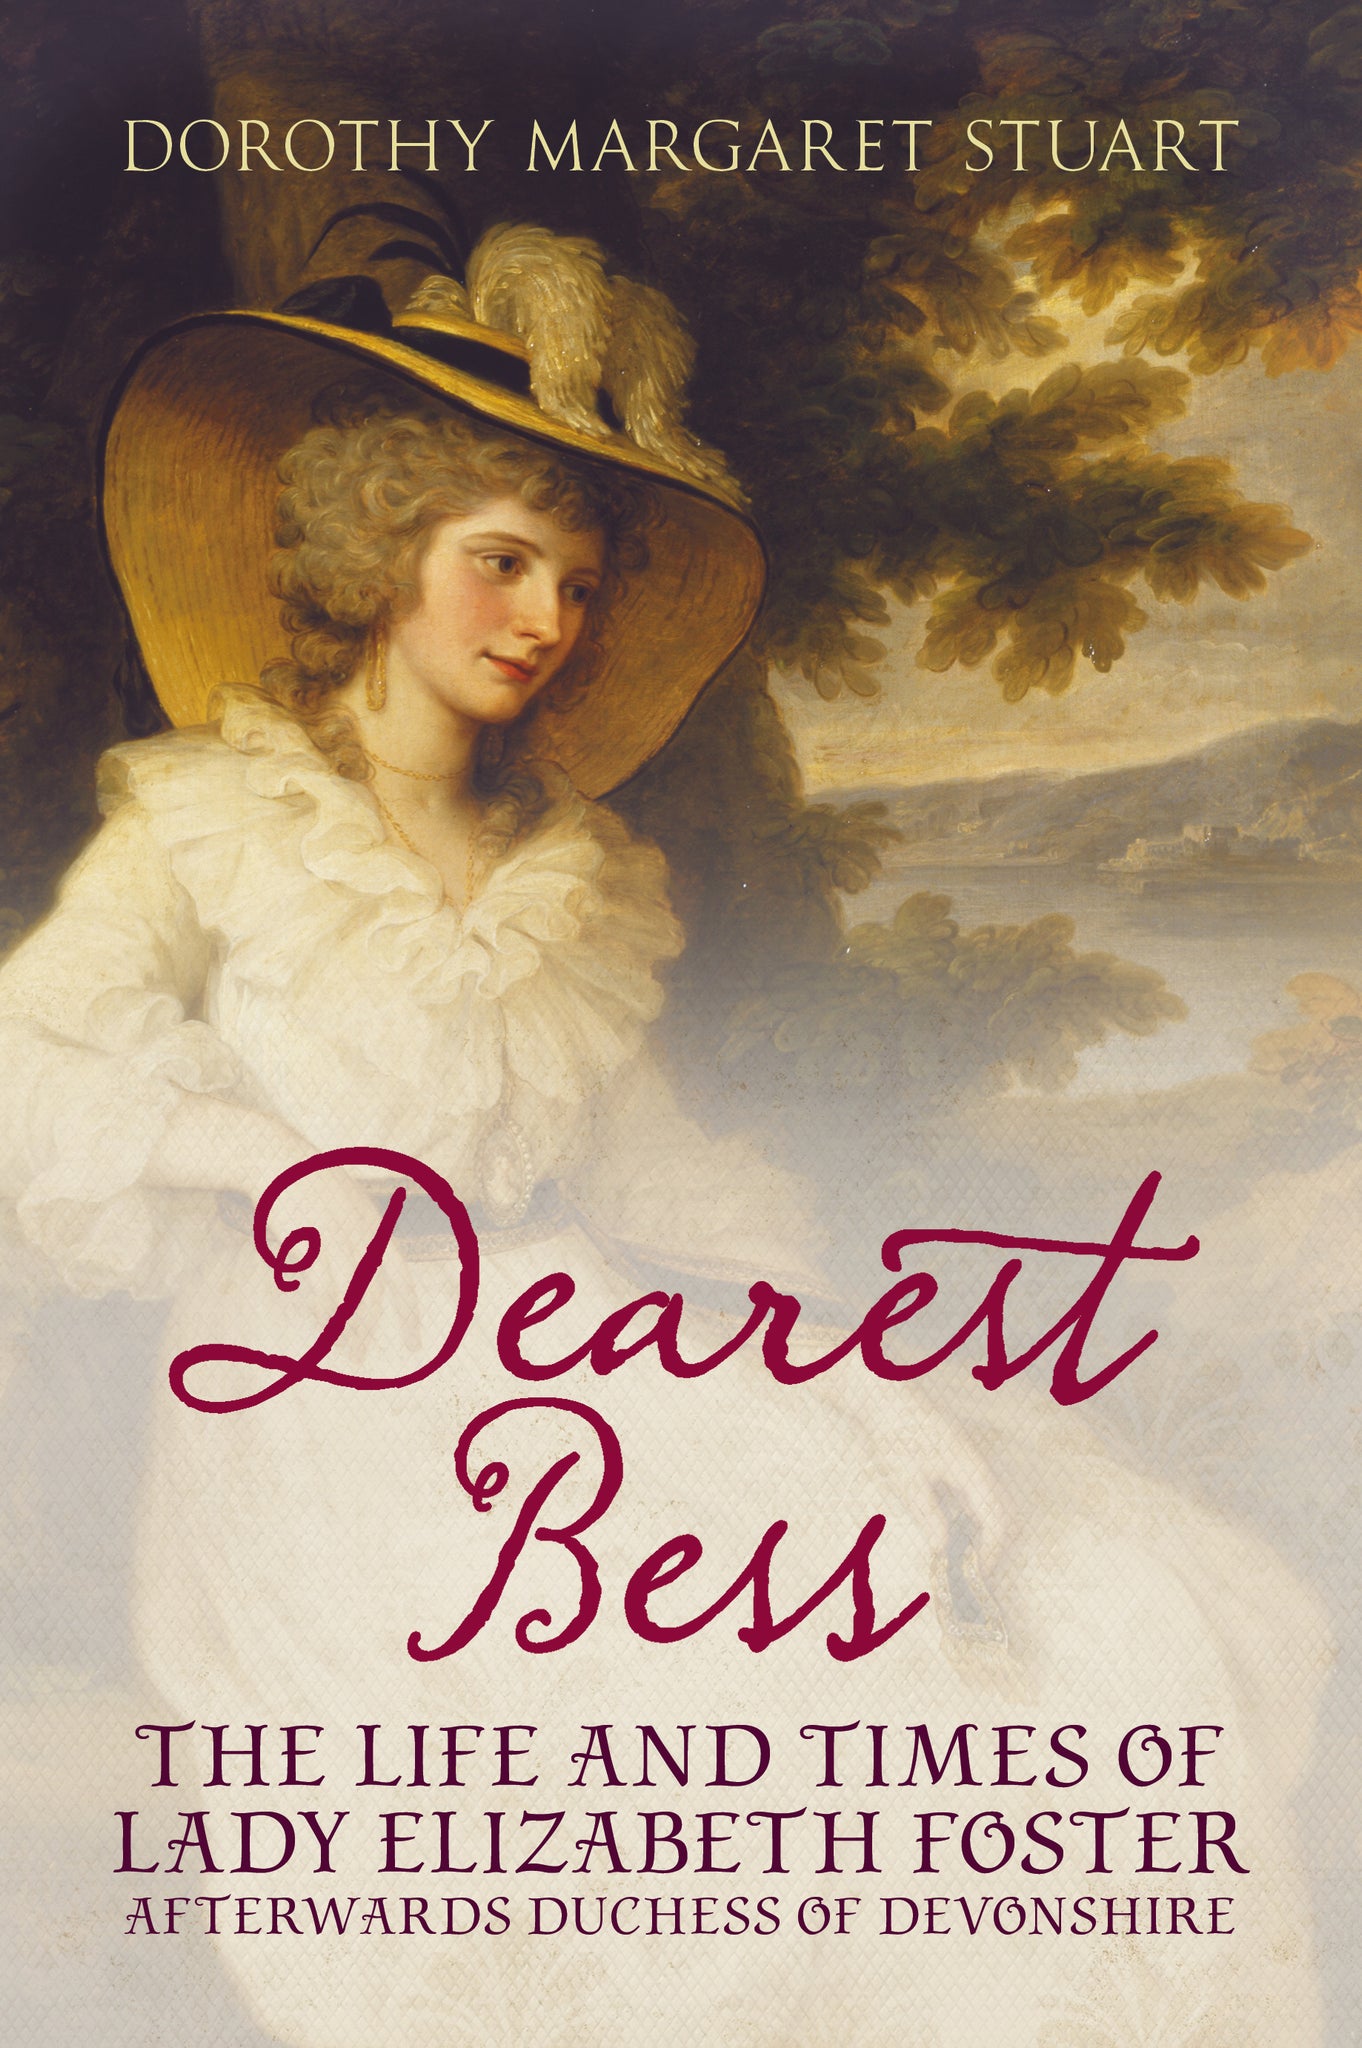 Dearest Bess: The Live and Times of Lady Elizabeth Foster - available now from Fonthill Media